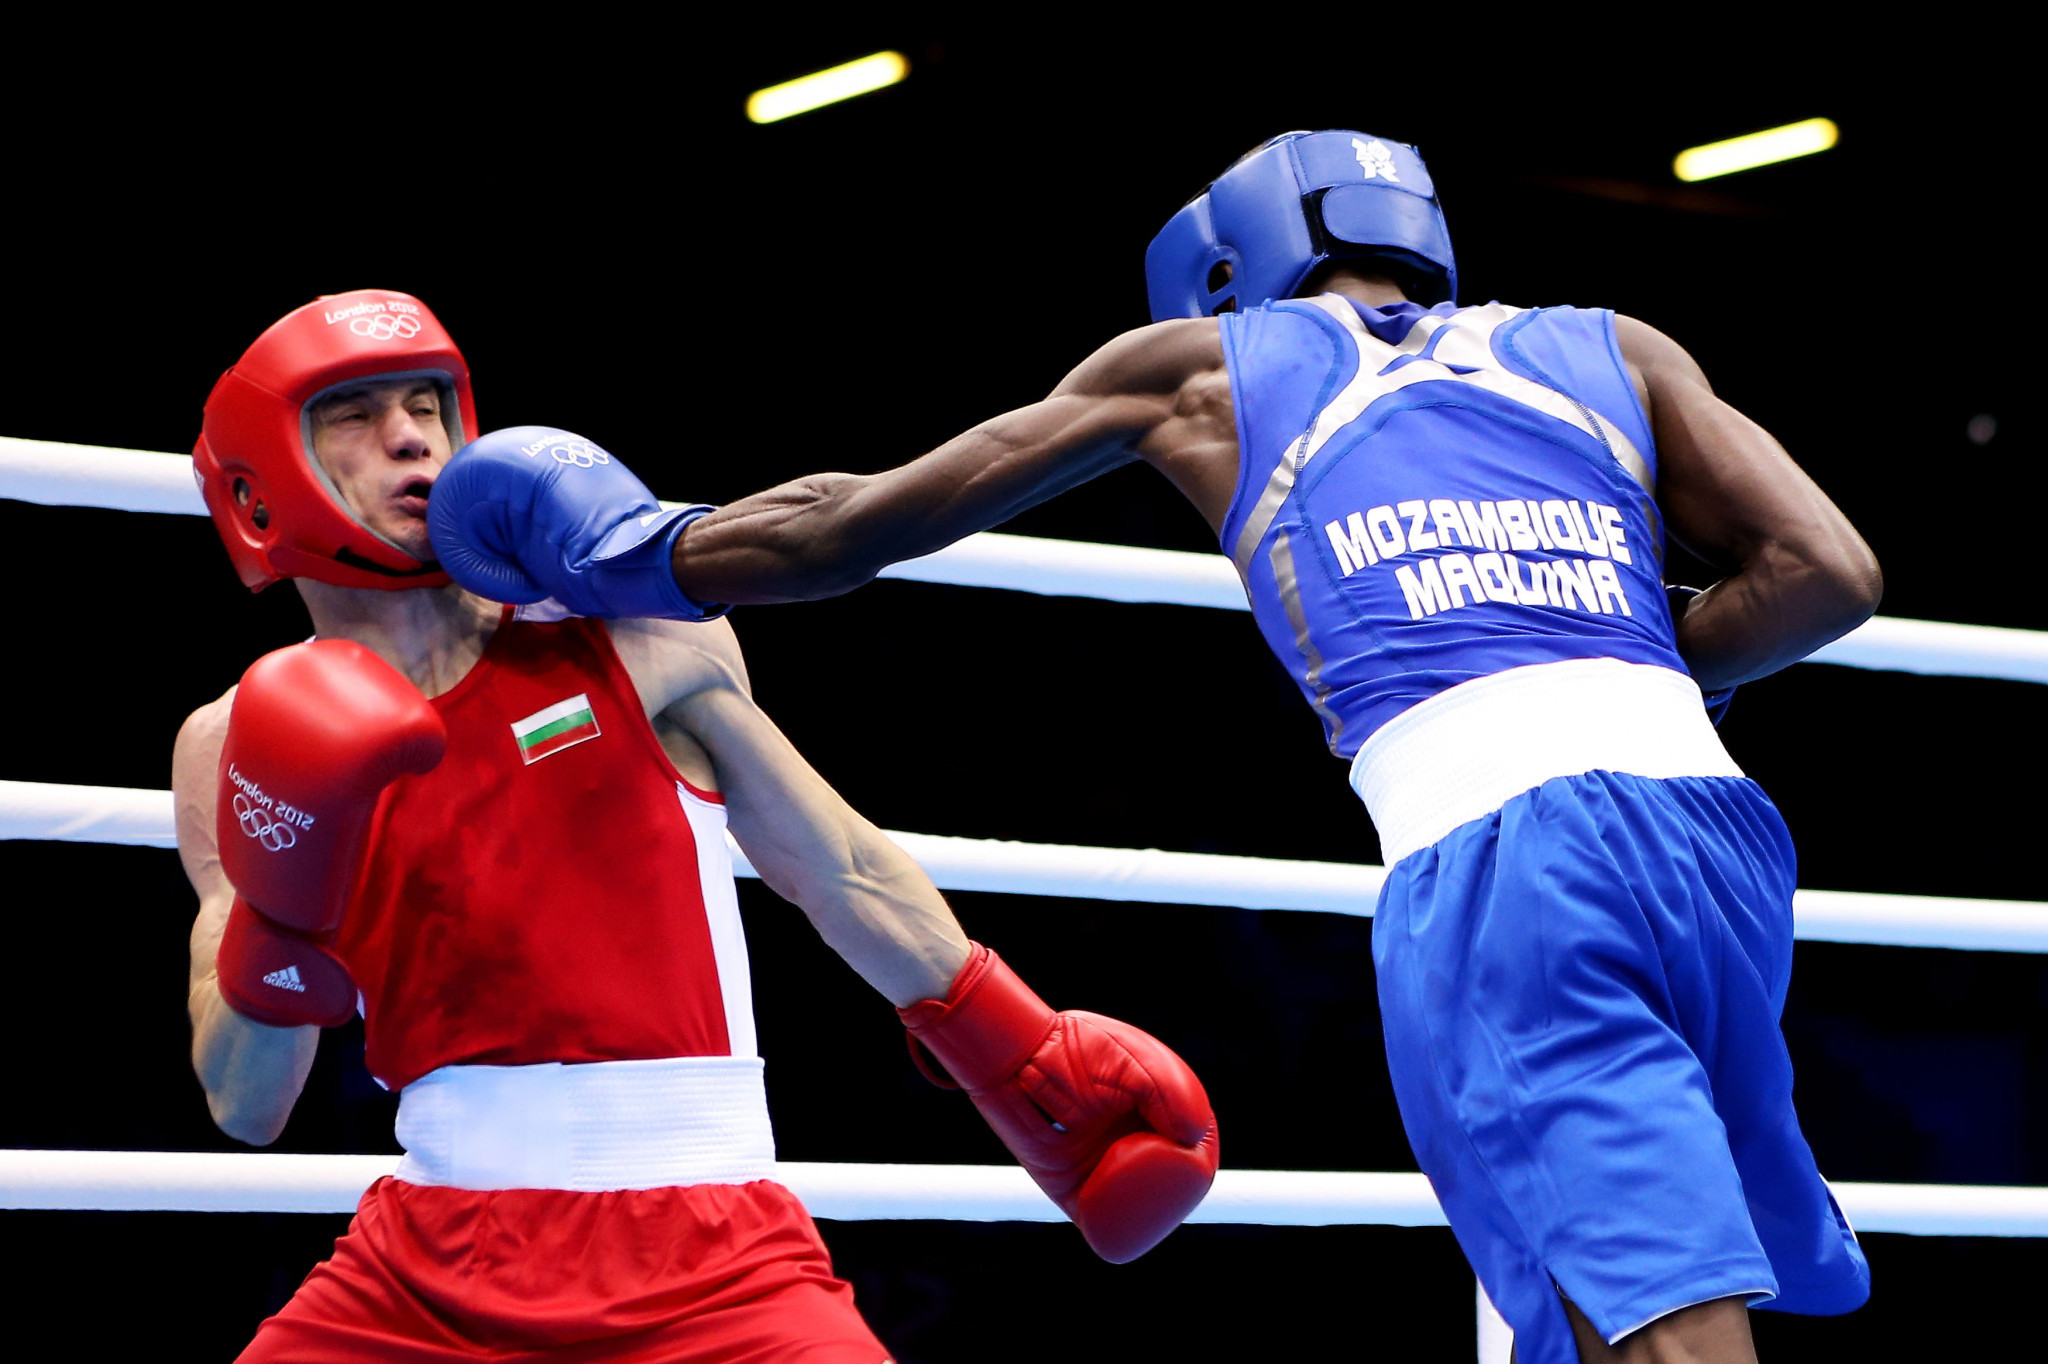 Máquina produces upset to reach men's flyweight semi-finals at African Olympic boxing qualifier